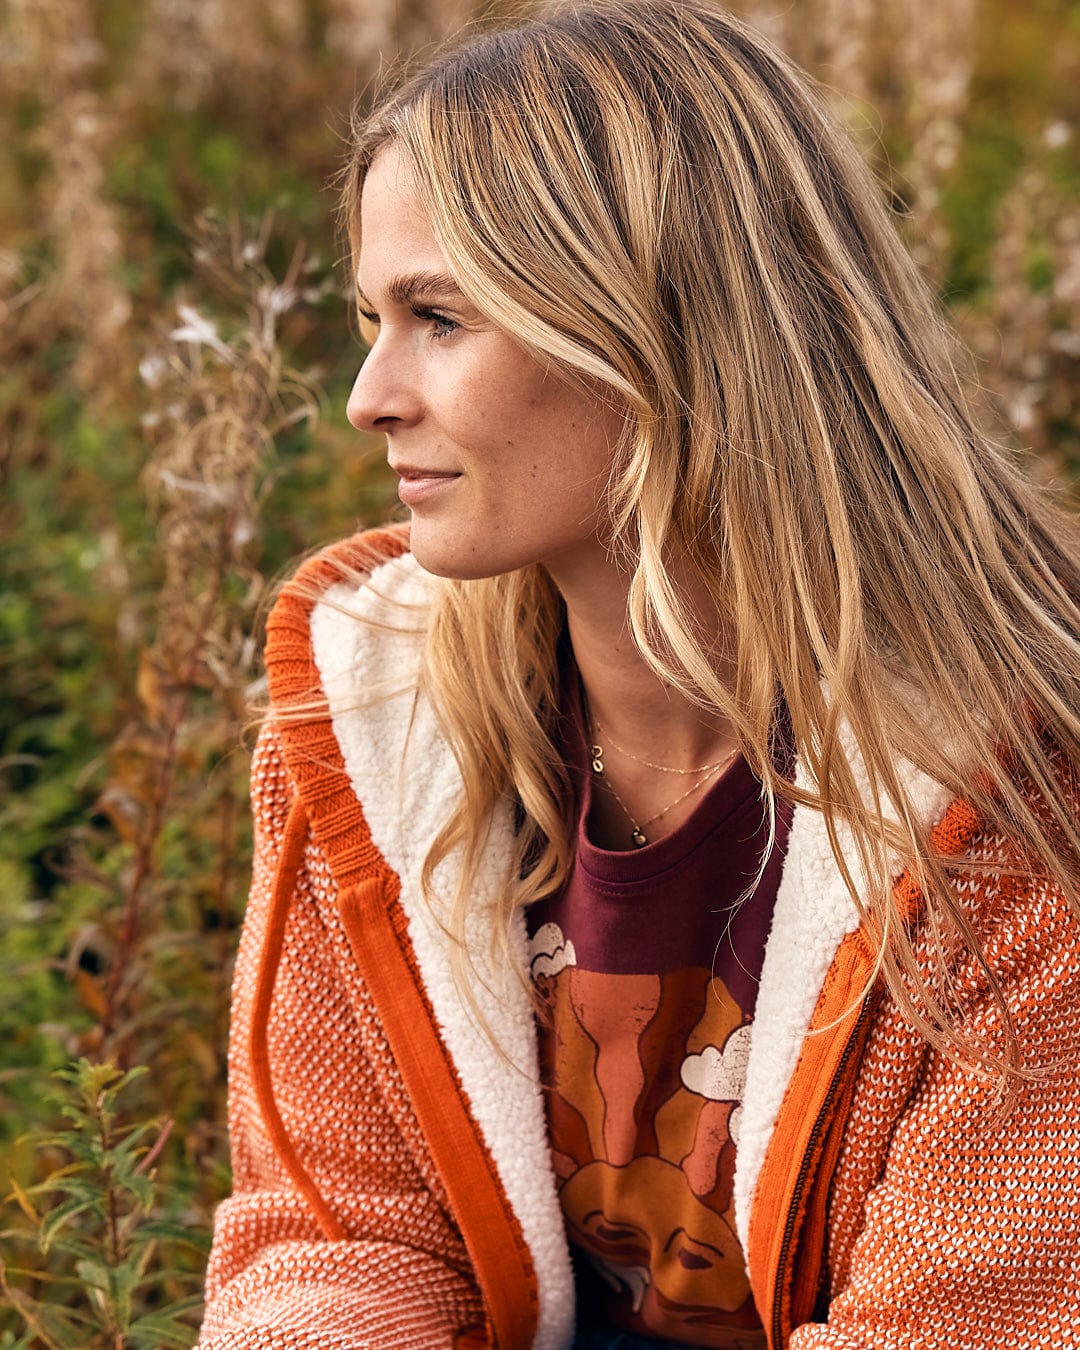 A woman sitting in a field with long blonde hair is wearing the Saltrock - Helly Womens Borg Lined Knitted Hoodie in Orange.